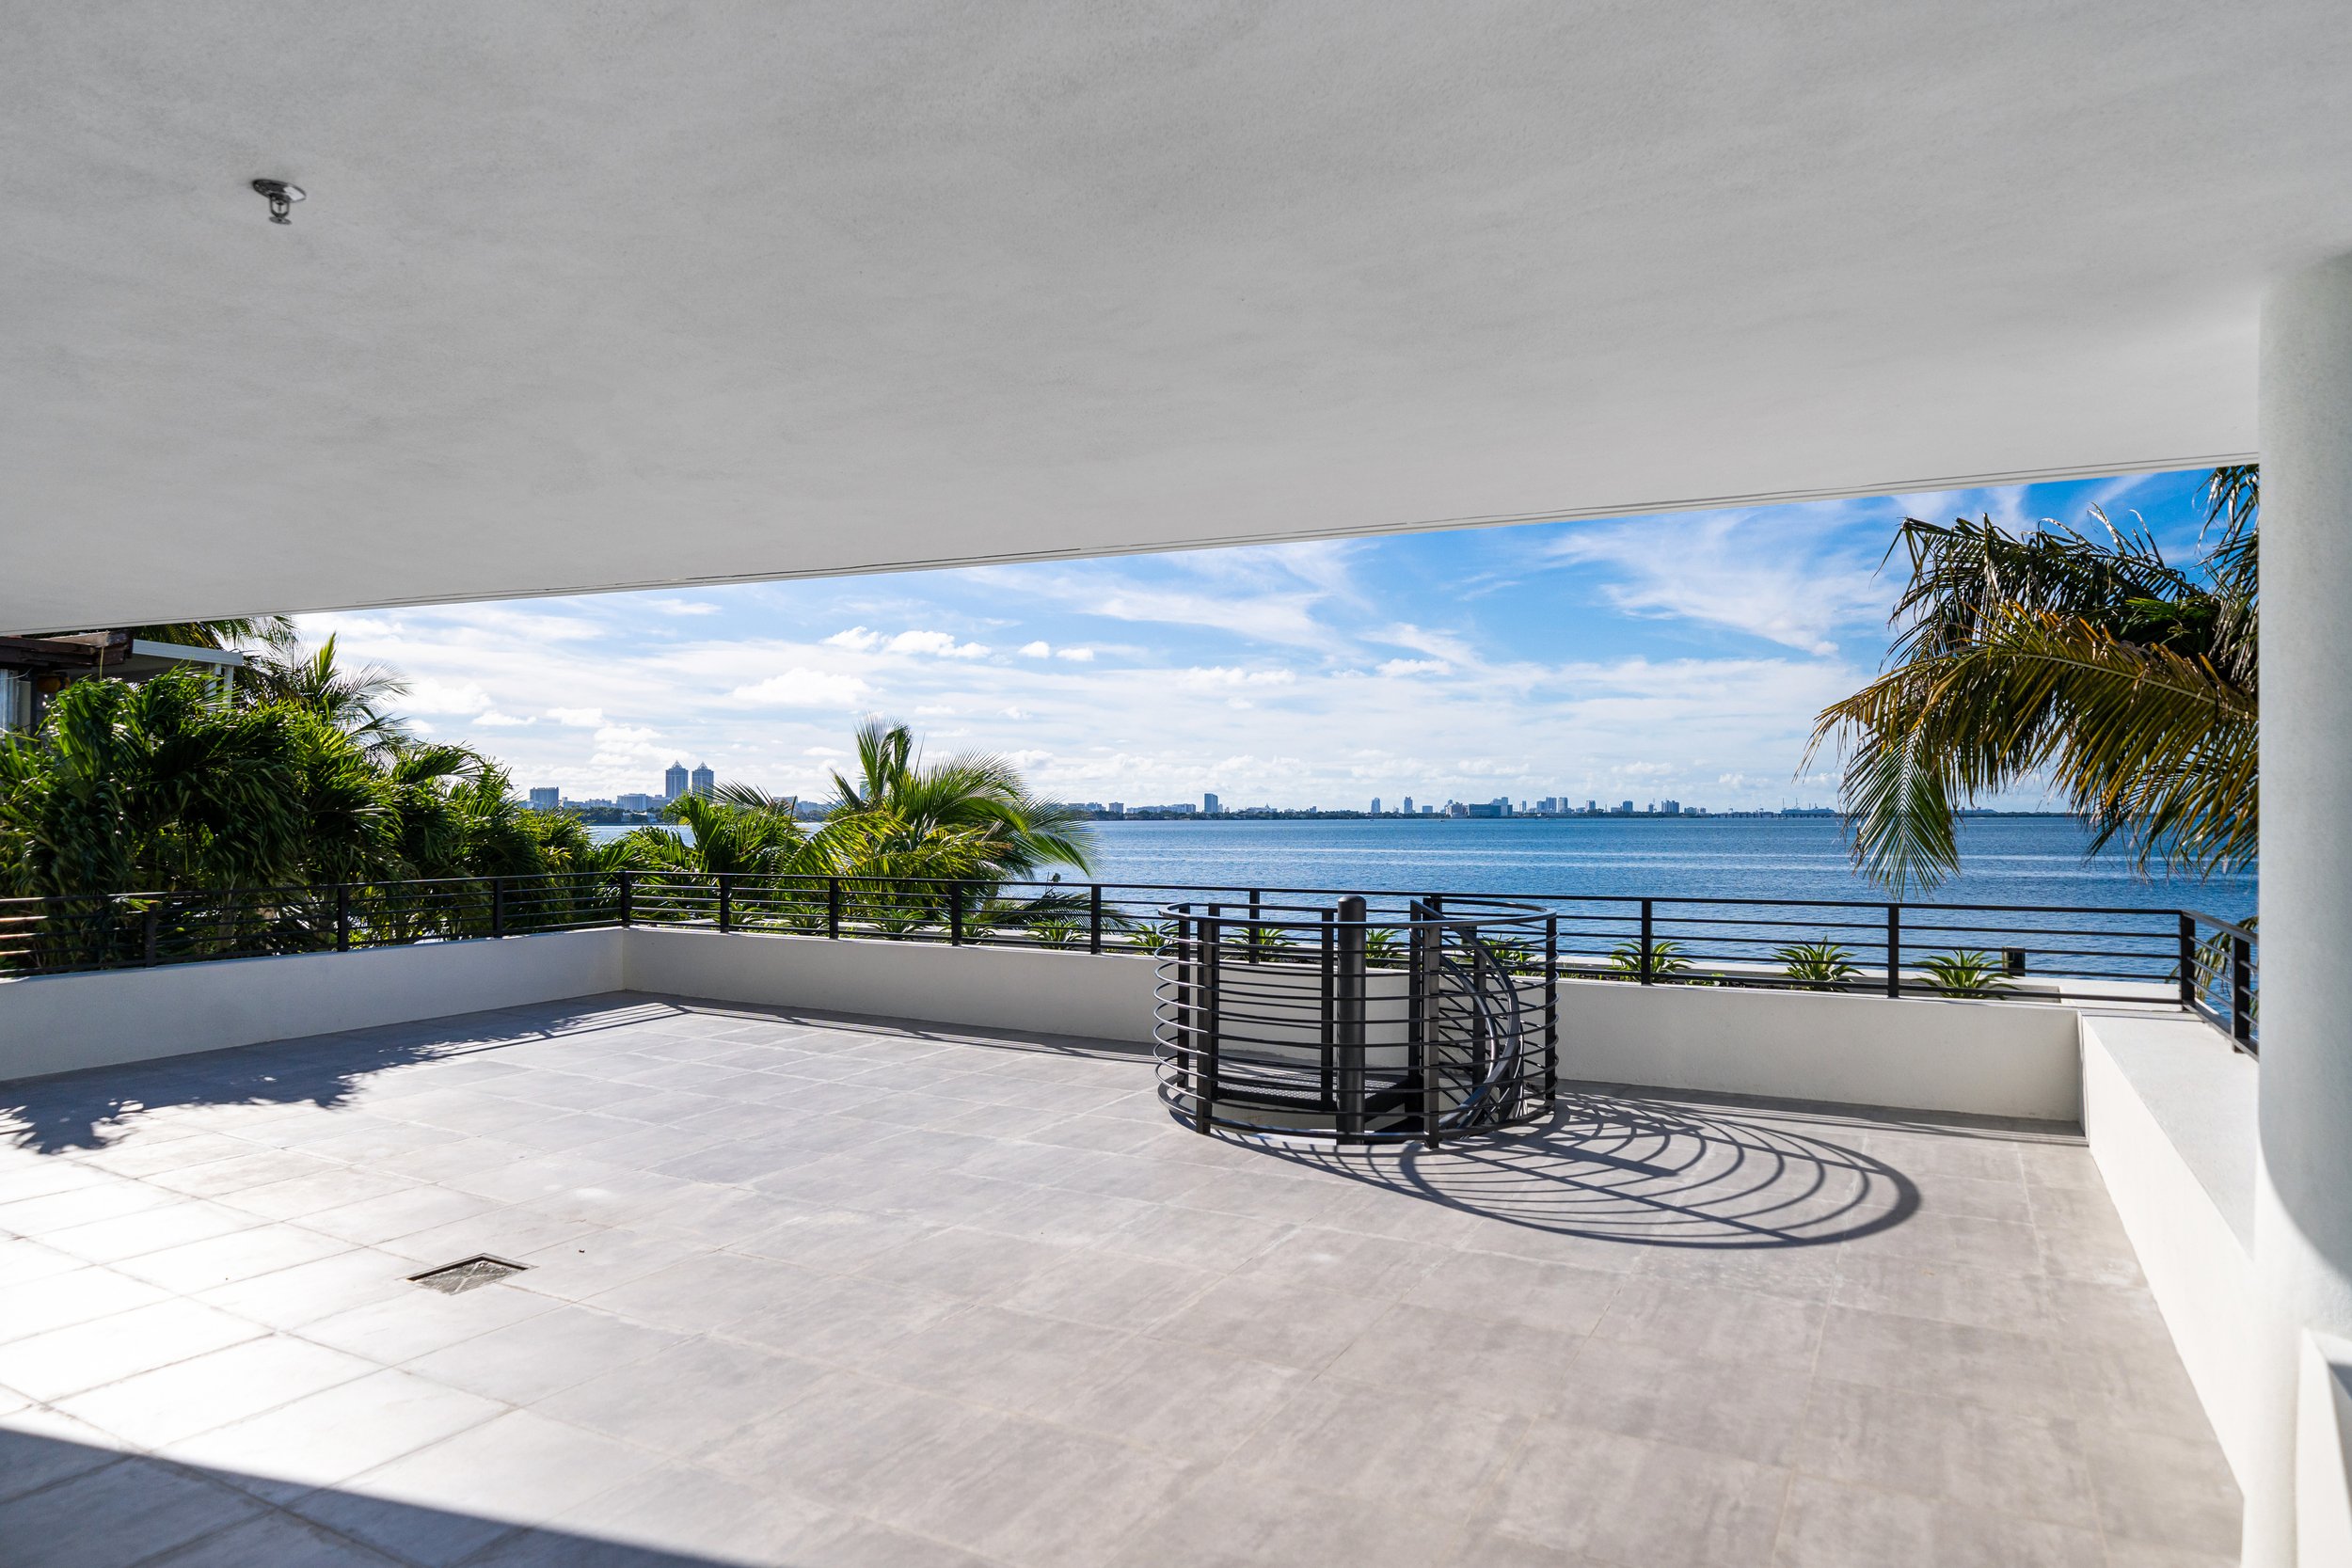 Sabal Development Sells Newly Constructed Luxury Waterfront Apartment Building On Miami Beach's Isle of Normandy 11.jpg